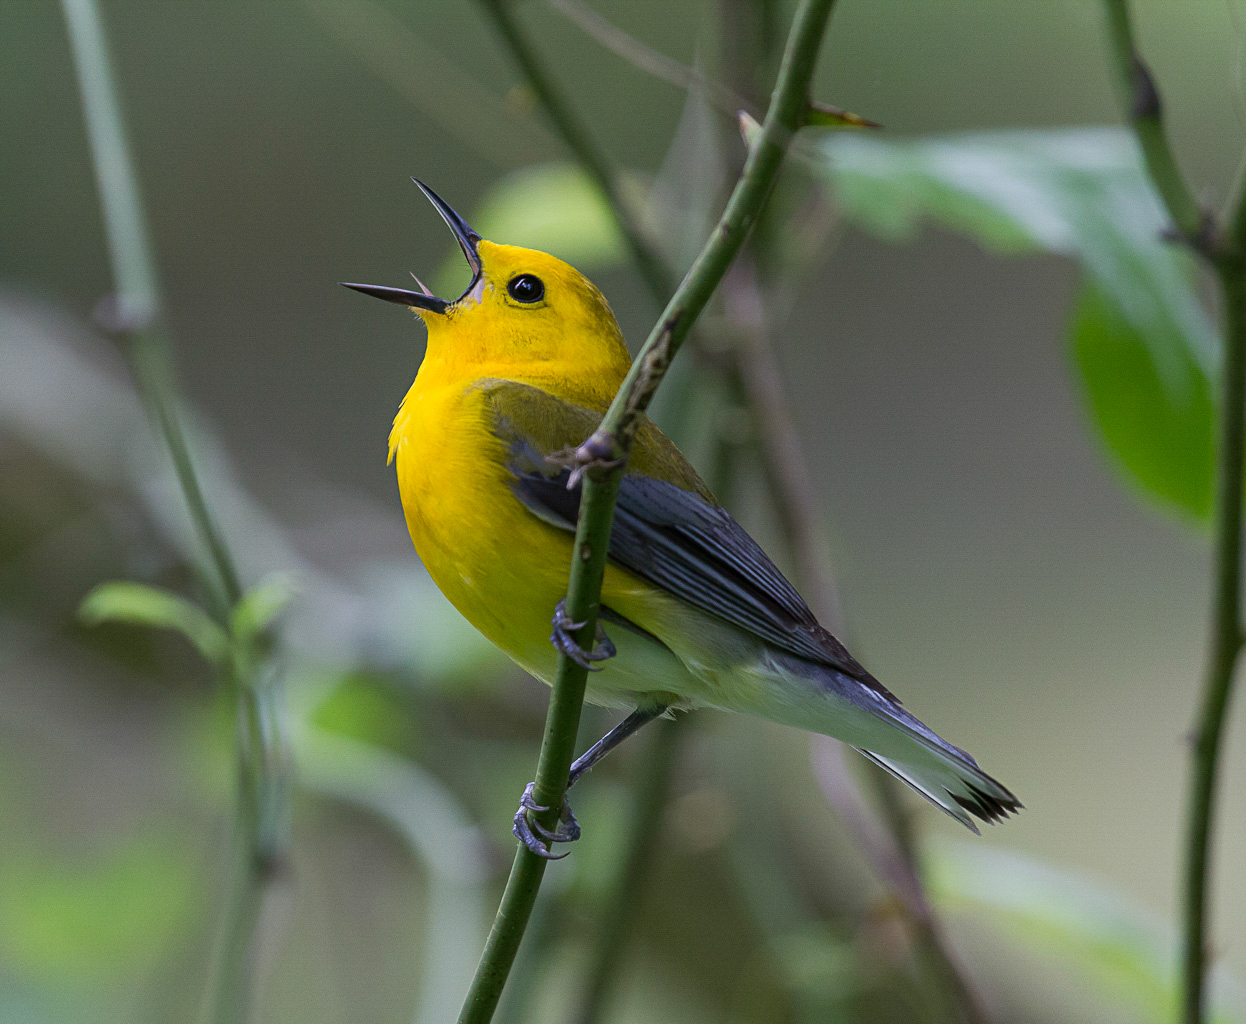 While Prothonotary Warblers rarely breed this far north, they occasionally “overshoot” while traveling north in the spring, and appear in New York City parks (and then presumably head back south). Photo: David Boltz/Audubon Photography Awards